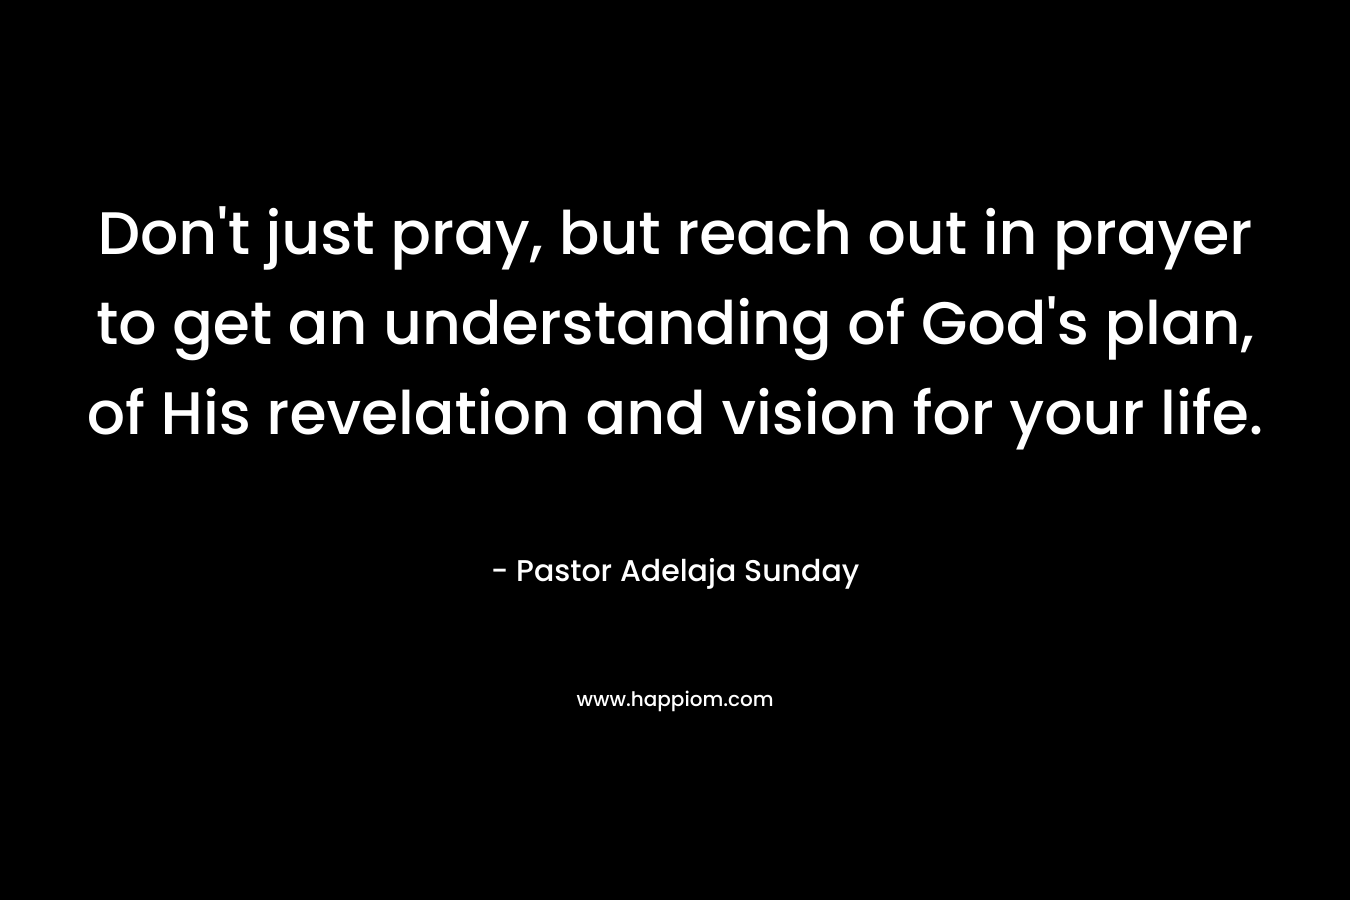 Don't just pray, but reach out in prayer to get an understanding of God's plan, of His revelation and vision for your life.